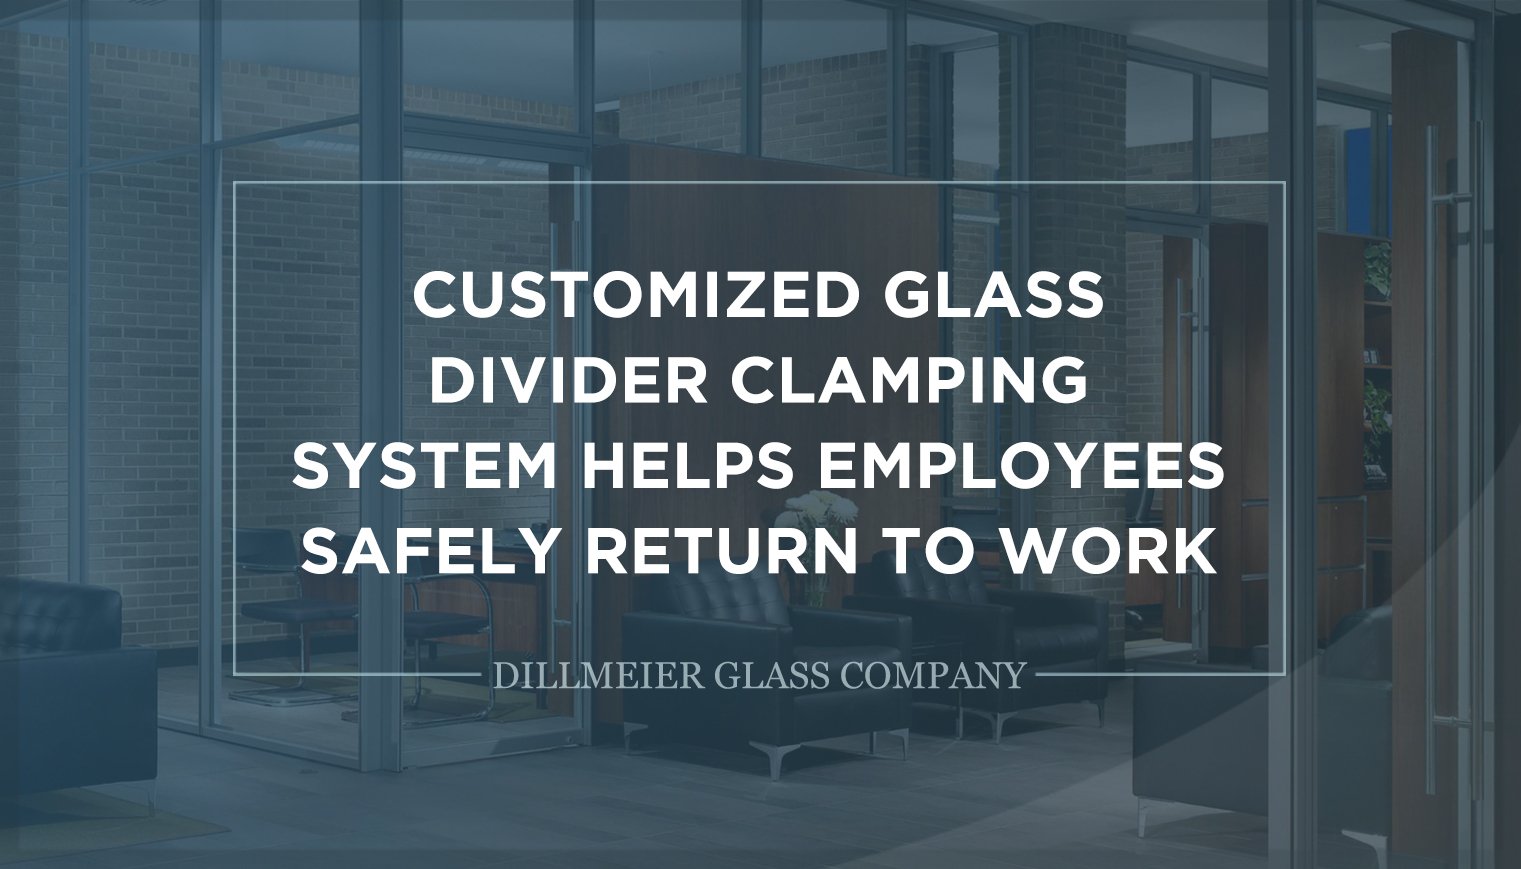 Title Graphic - Customized Glass Divider Clamping System Helps Employees Safely Return to Work During COVID-19